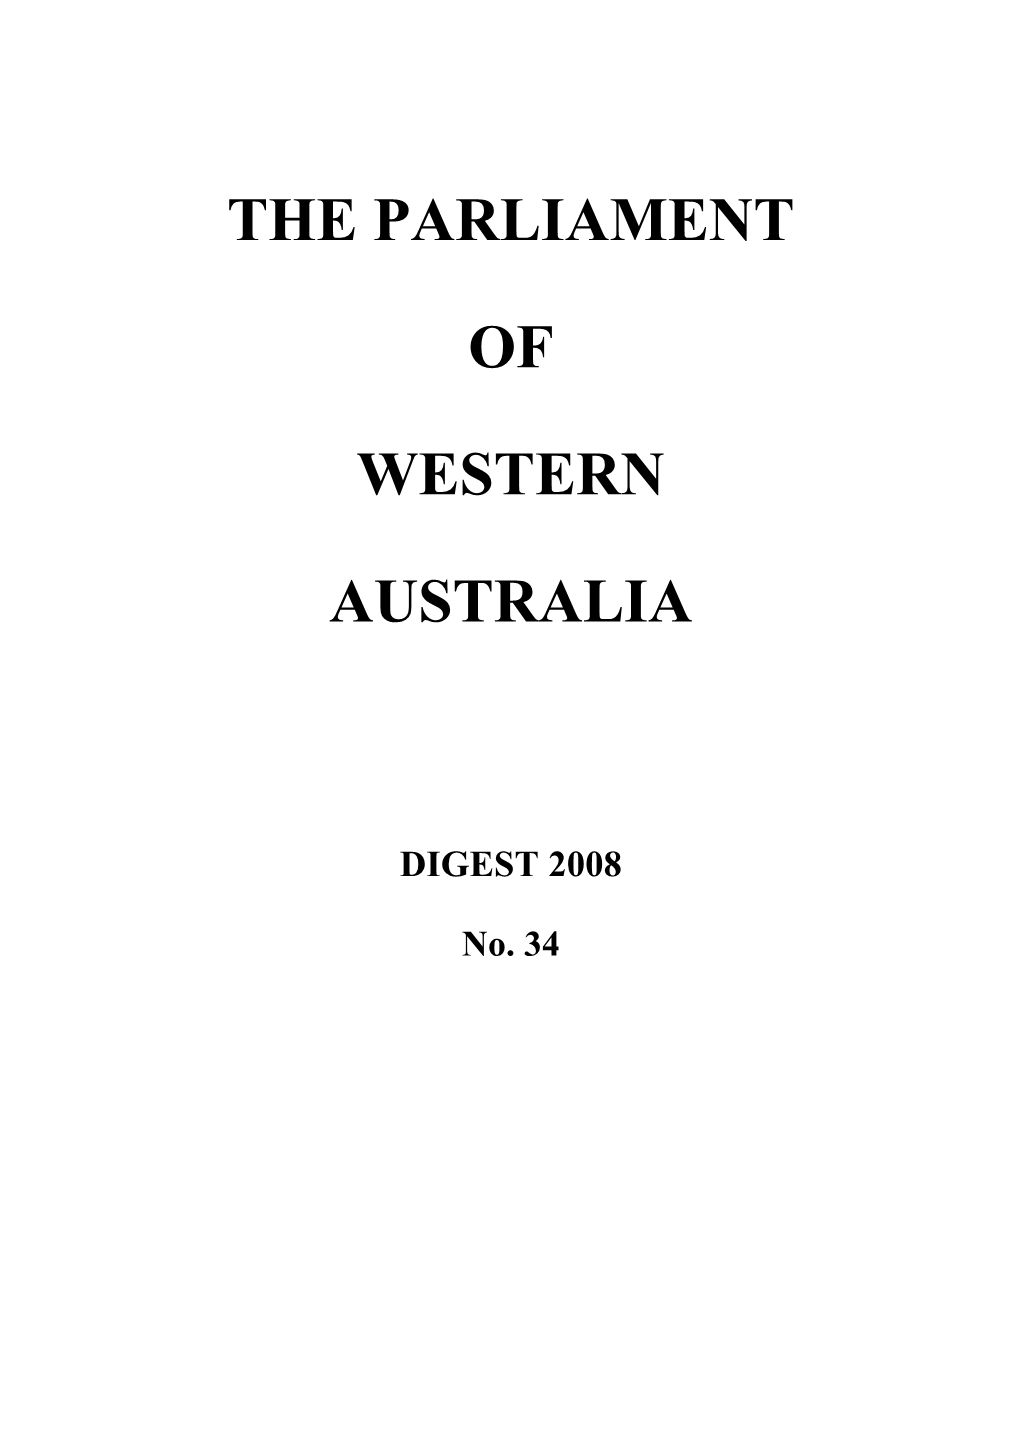 The Parliament of Western Australia Digest 2008 First